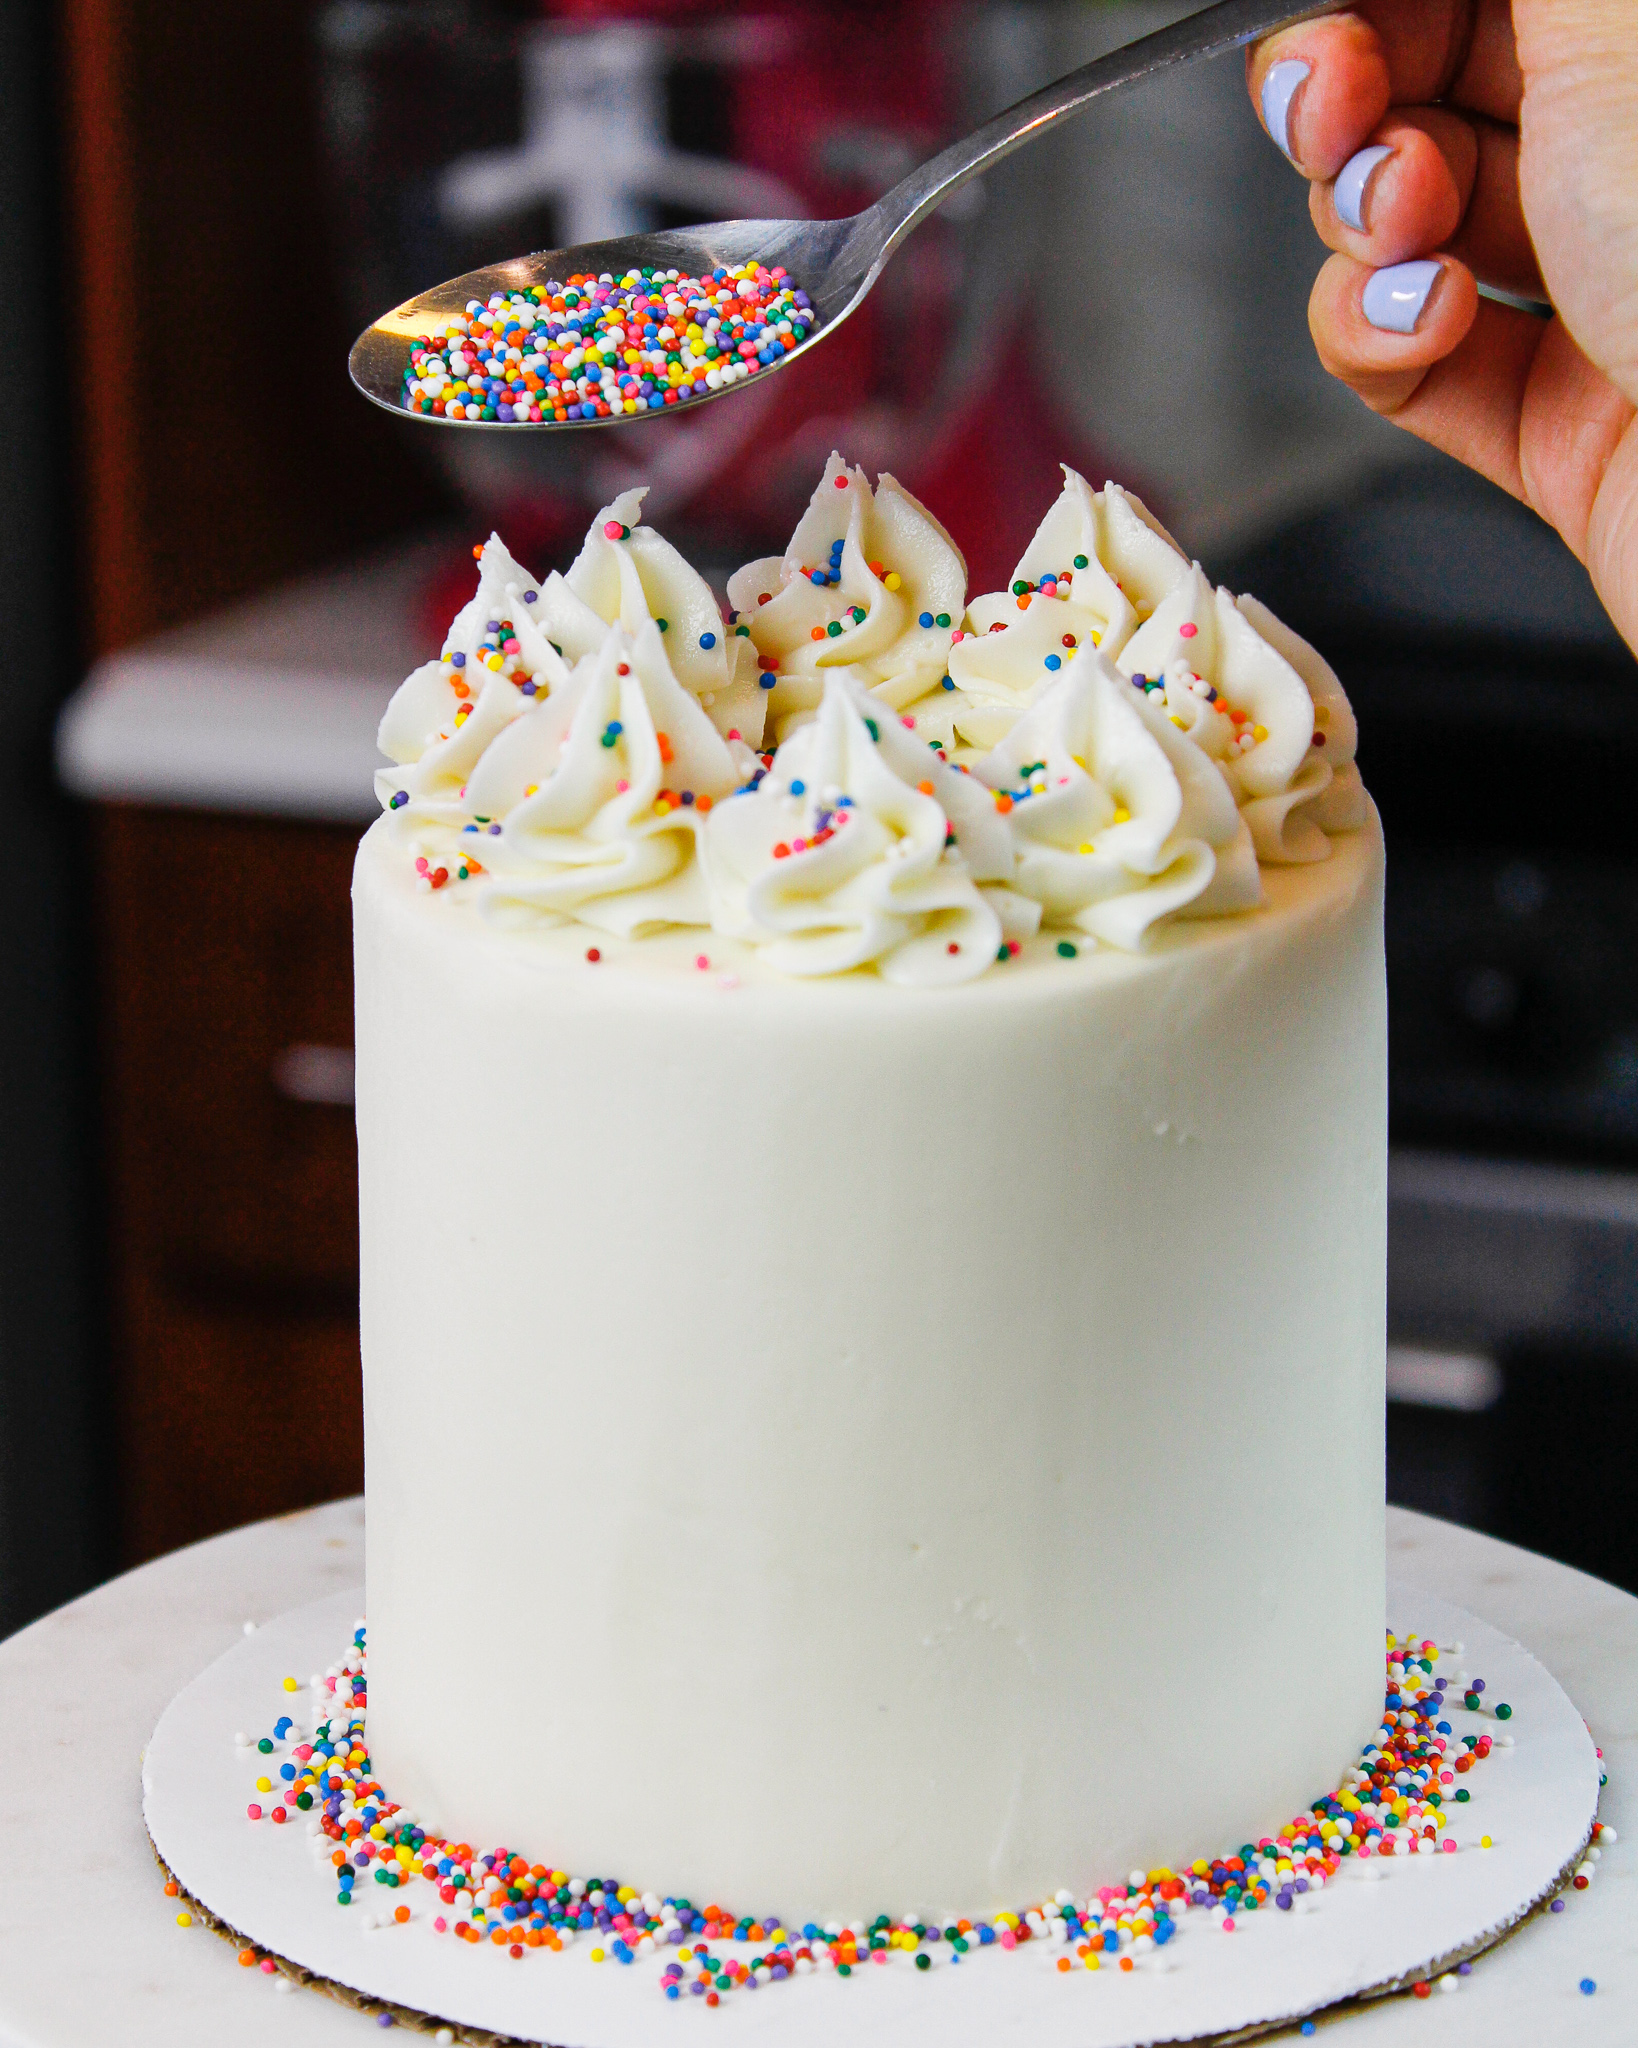 30 Easy Cake Recipes That Every Home Baker Should Master